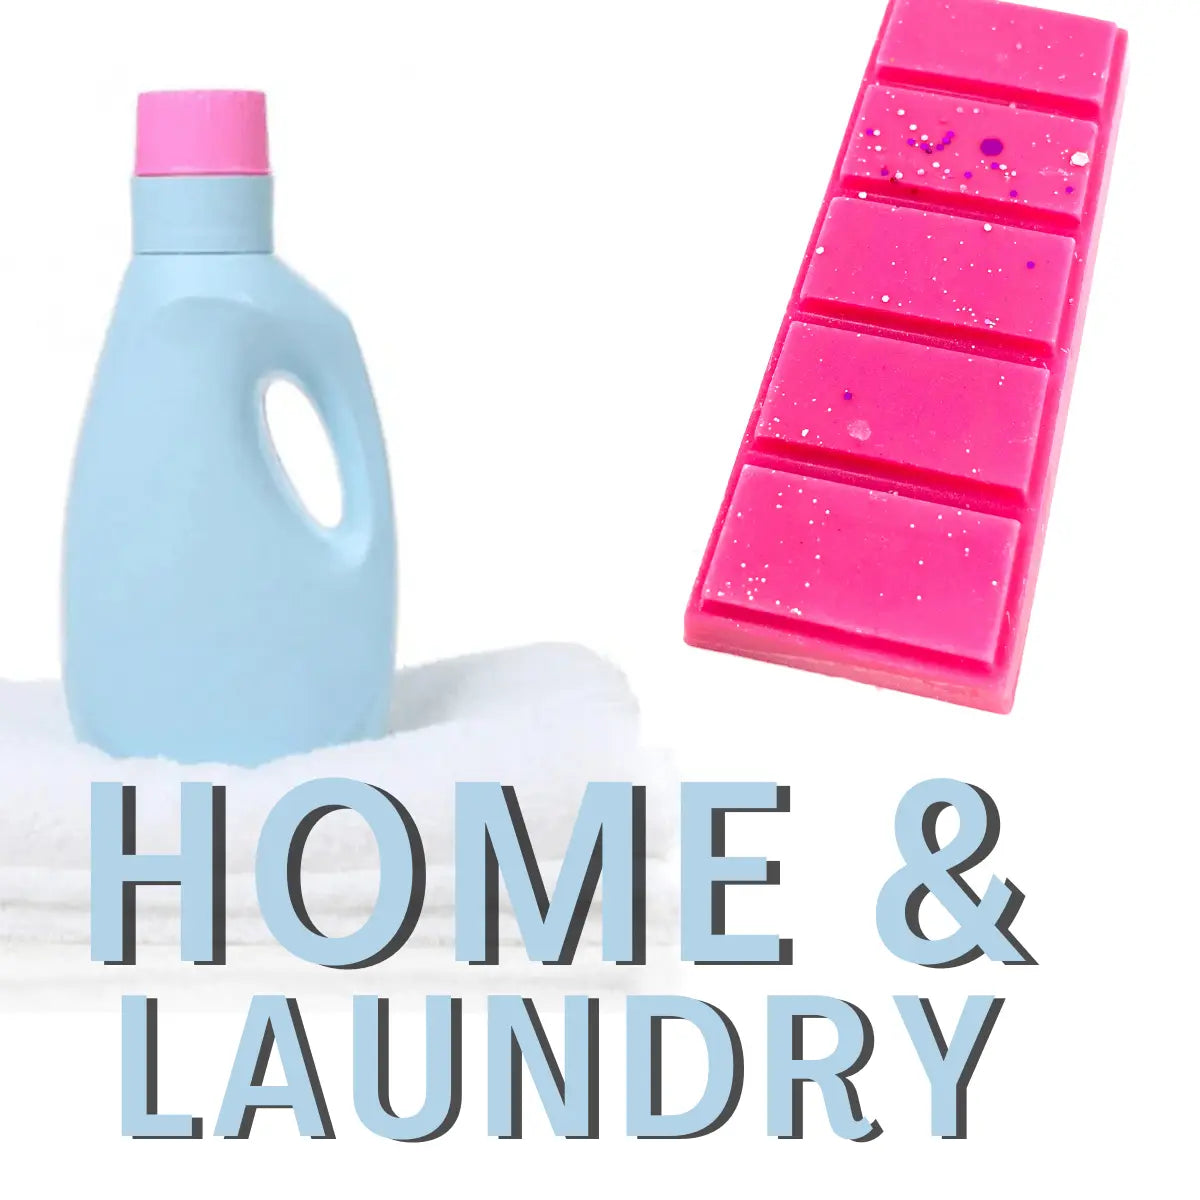 Home & Laundry